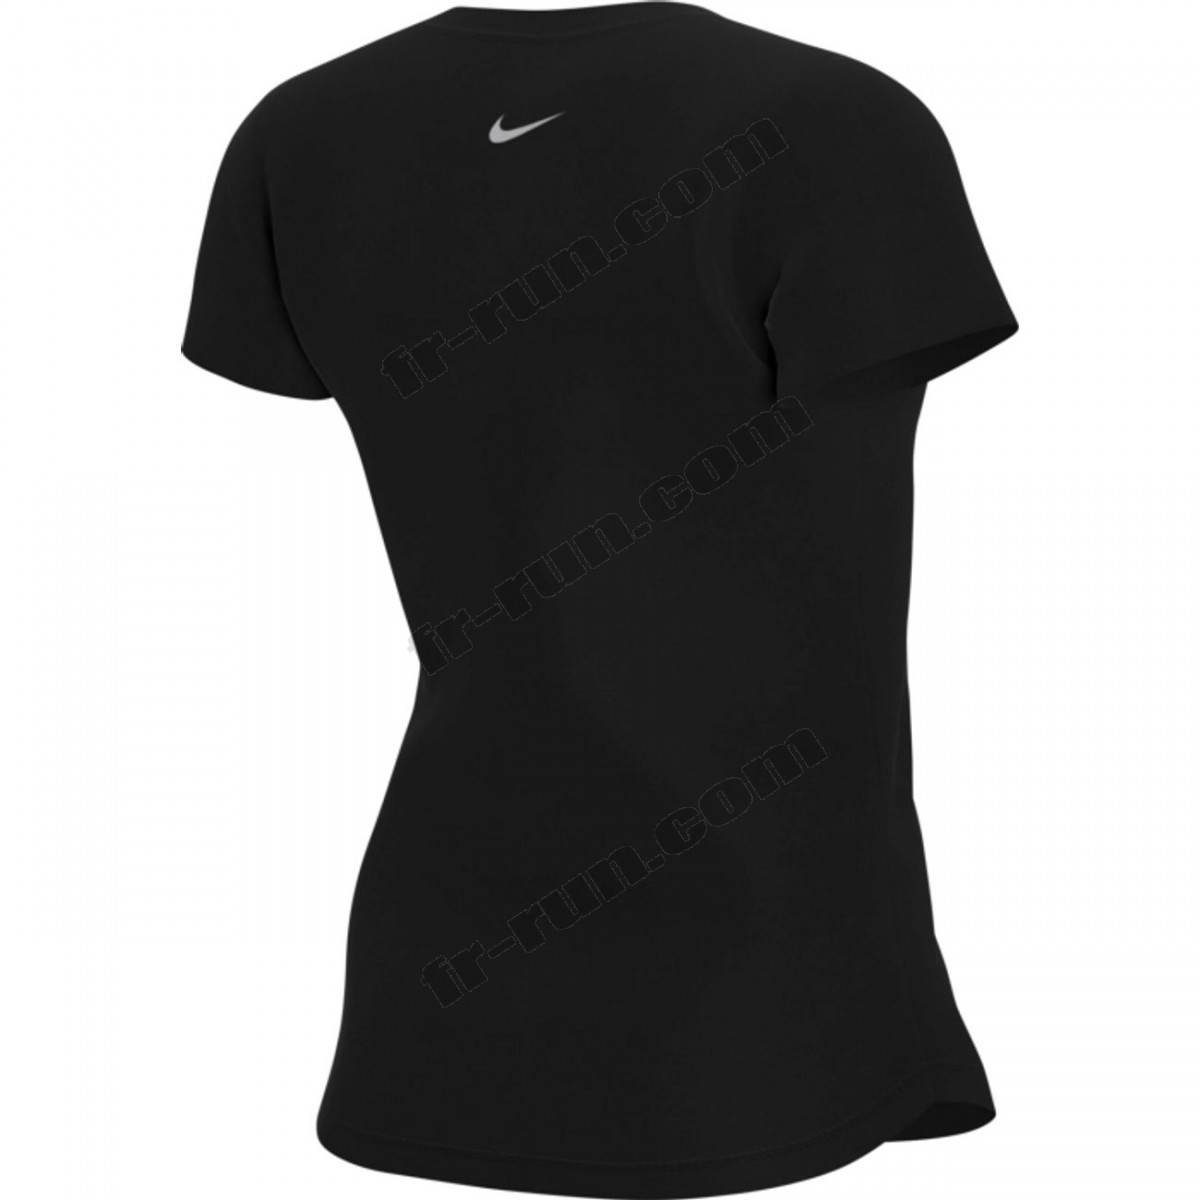 Nike/TOP running femme NIKE SWOOSH SS √ Nouveau style √ Soldes - -1